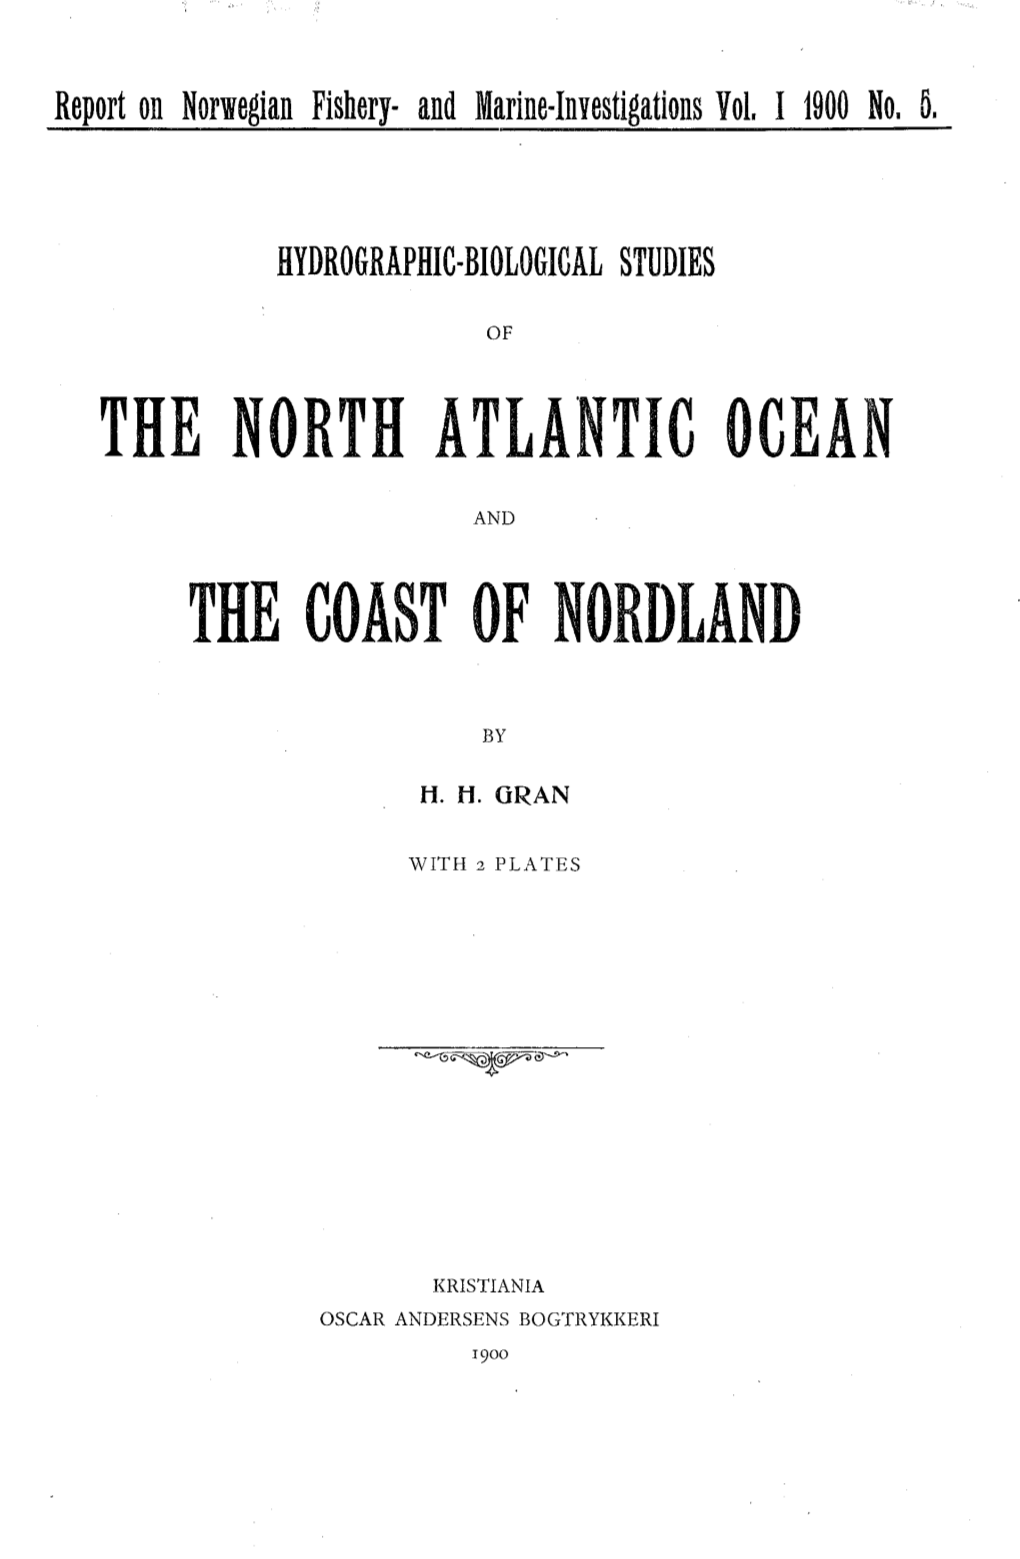 Hydrographic-Biological Studies of the North